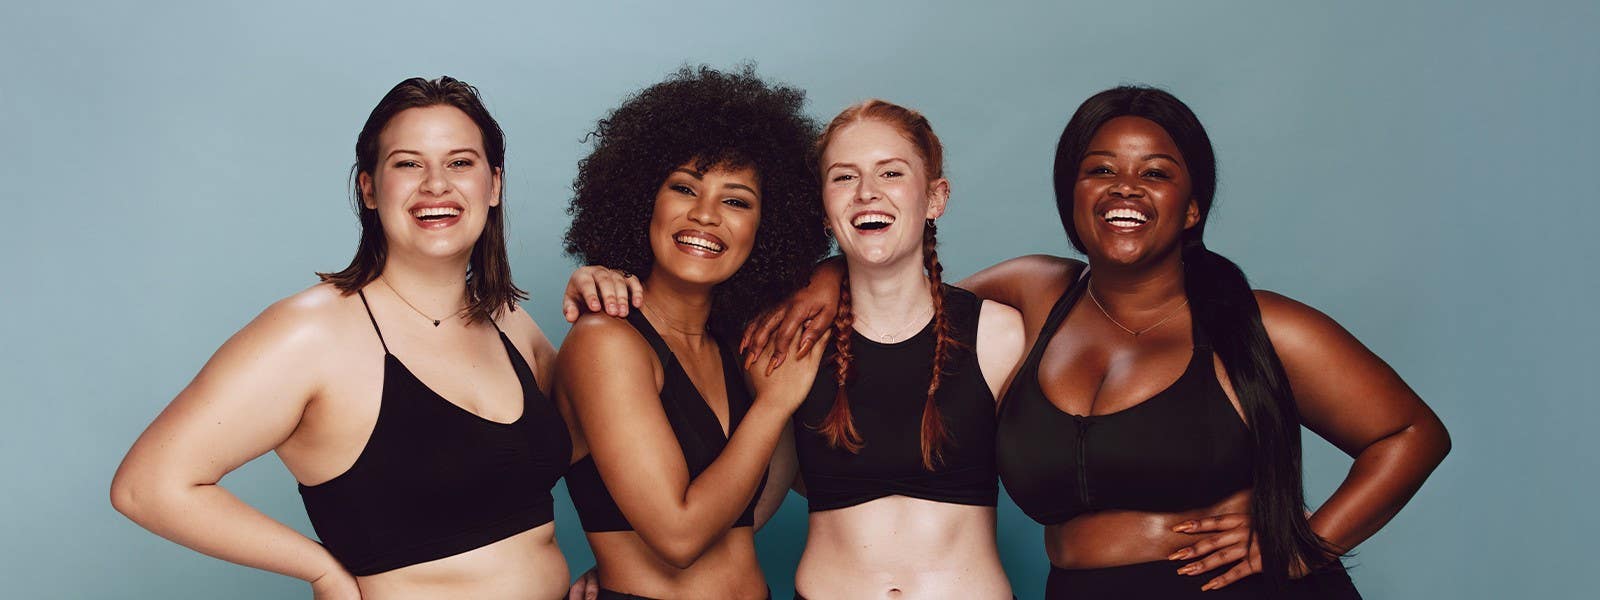 What Is a Pilates Body? And How We Can Make it Inclusive